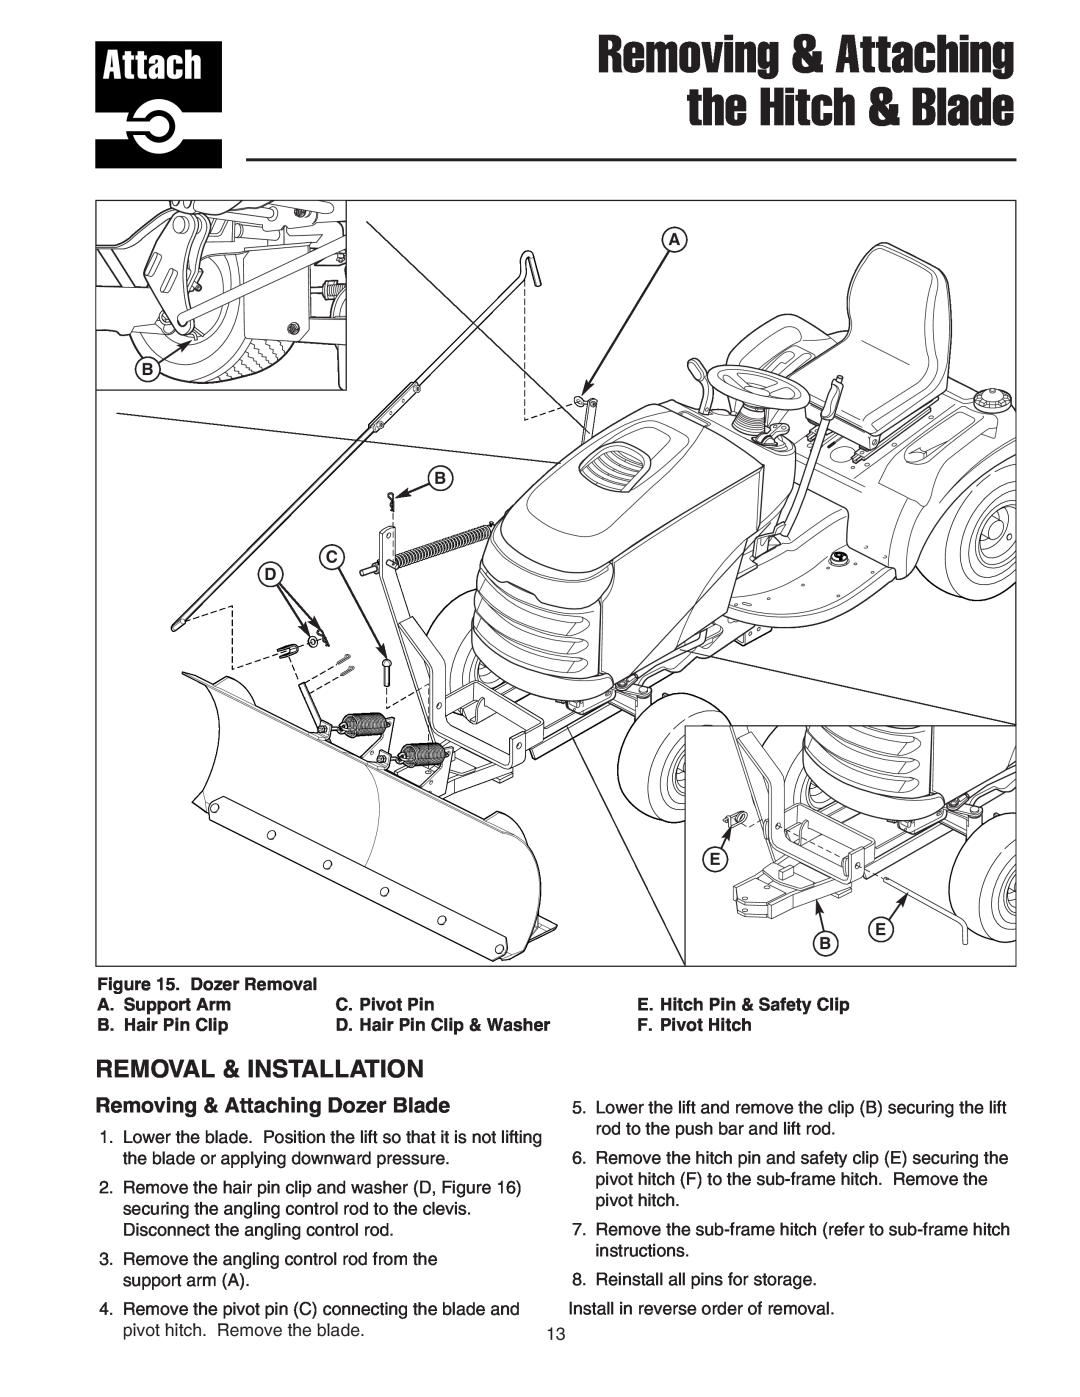 Snapper 1723445-02 manual Removing & Attaching the Hitch & Blade, Removal & Installation, Removing & Attaching Dozer Blade 